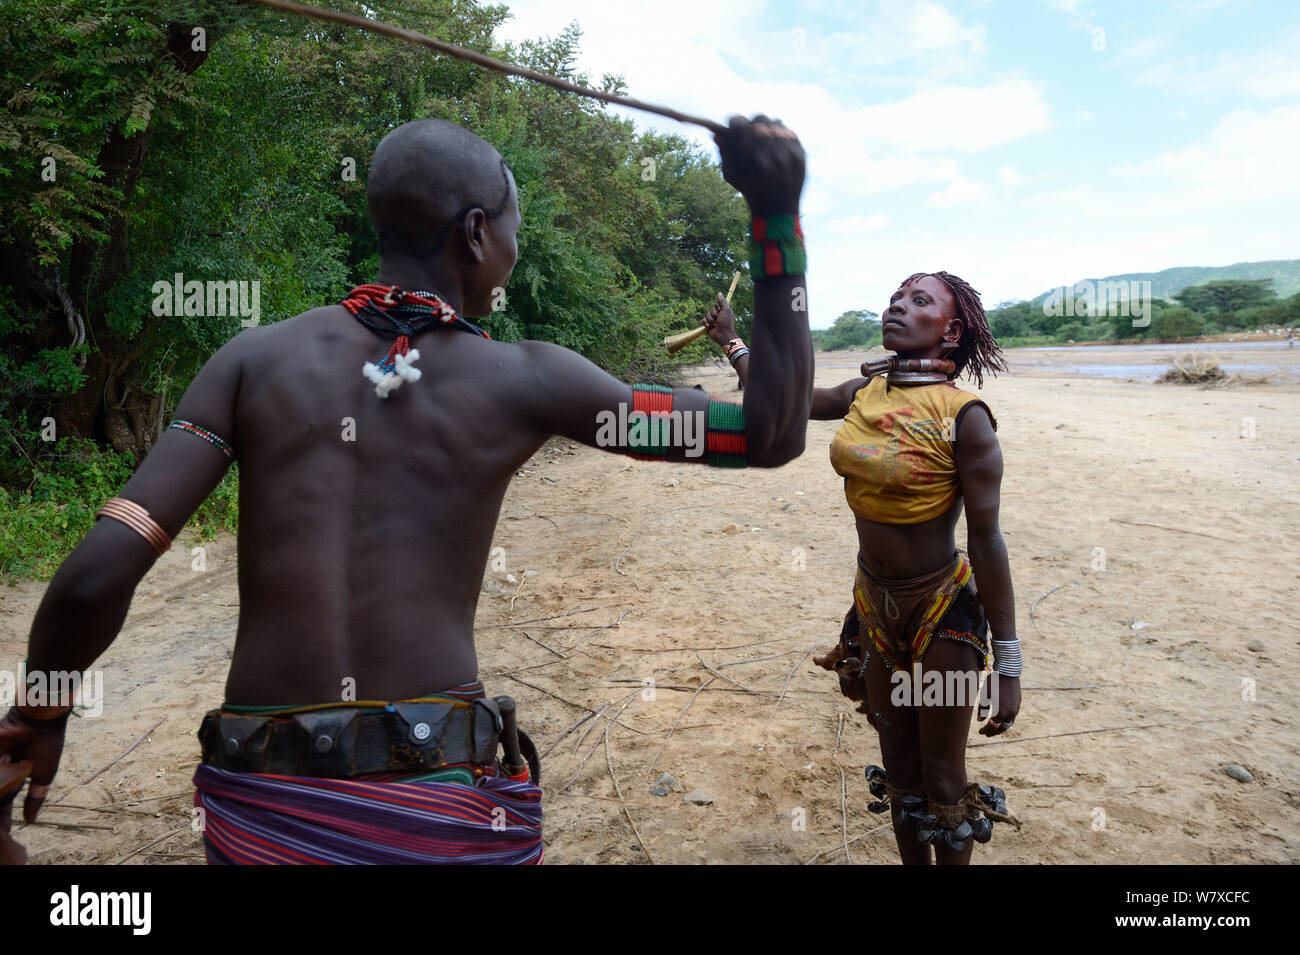 During the Ukuli ceremony and before the bull jumping, the Maza (young initiated men) whip the Hamer women who will defy them, showing no fear or signs of pain. Hamer tribe, Omo river Valley, Ethiopia, September 2014. Stock Photo